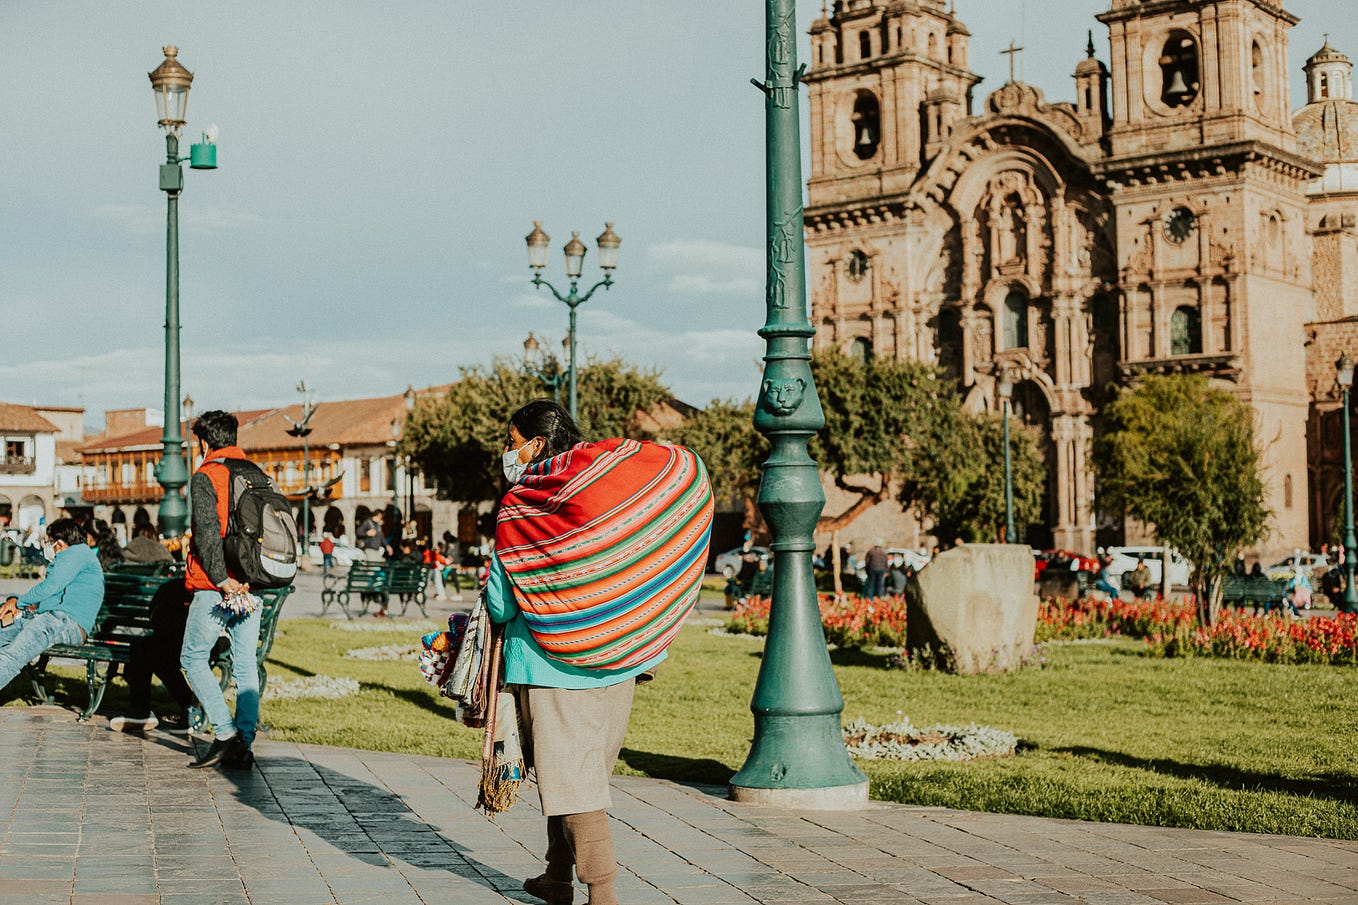 A Quechua woman in traditional clothing carries a bundle of goods in central Cusco, Peru.